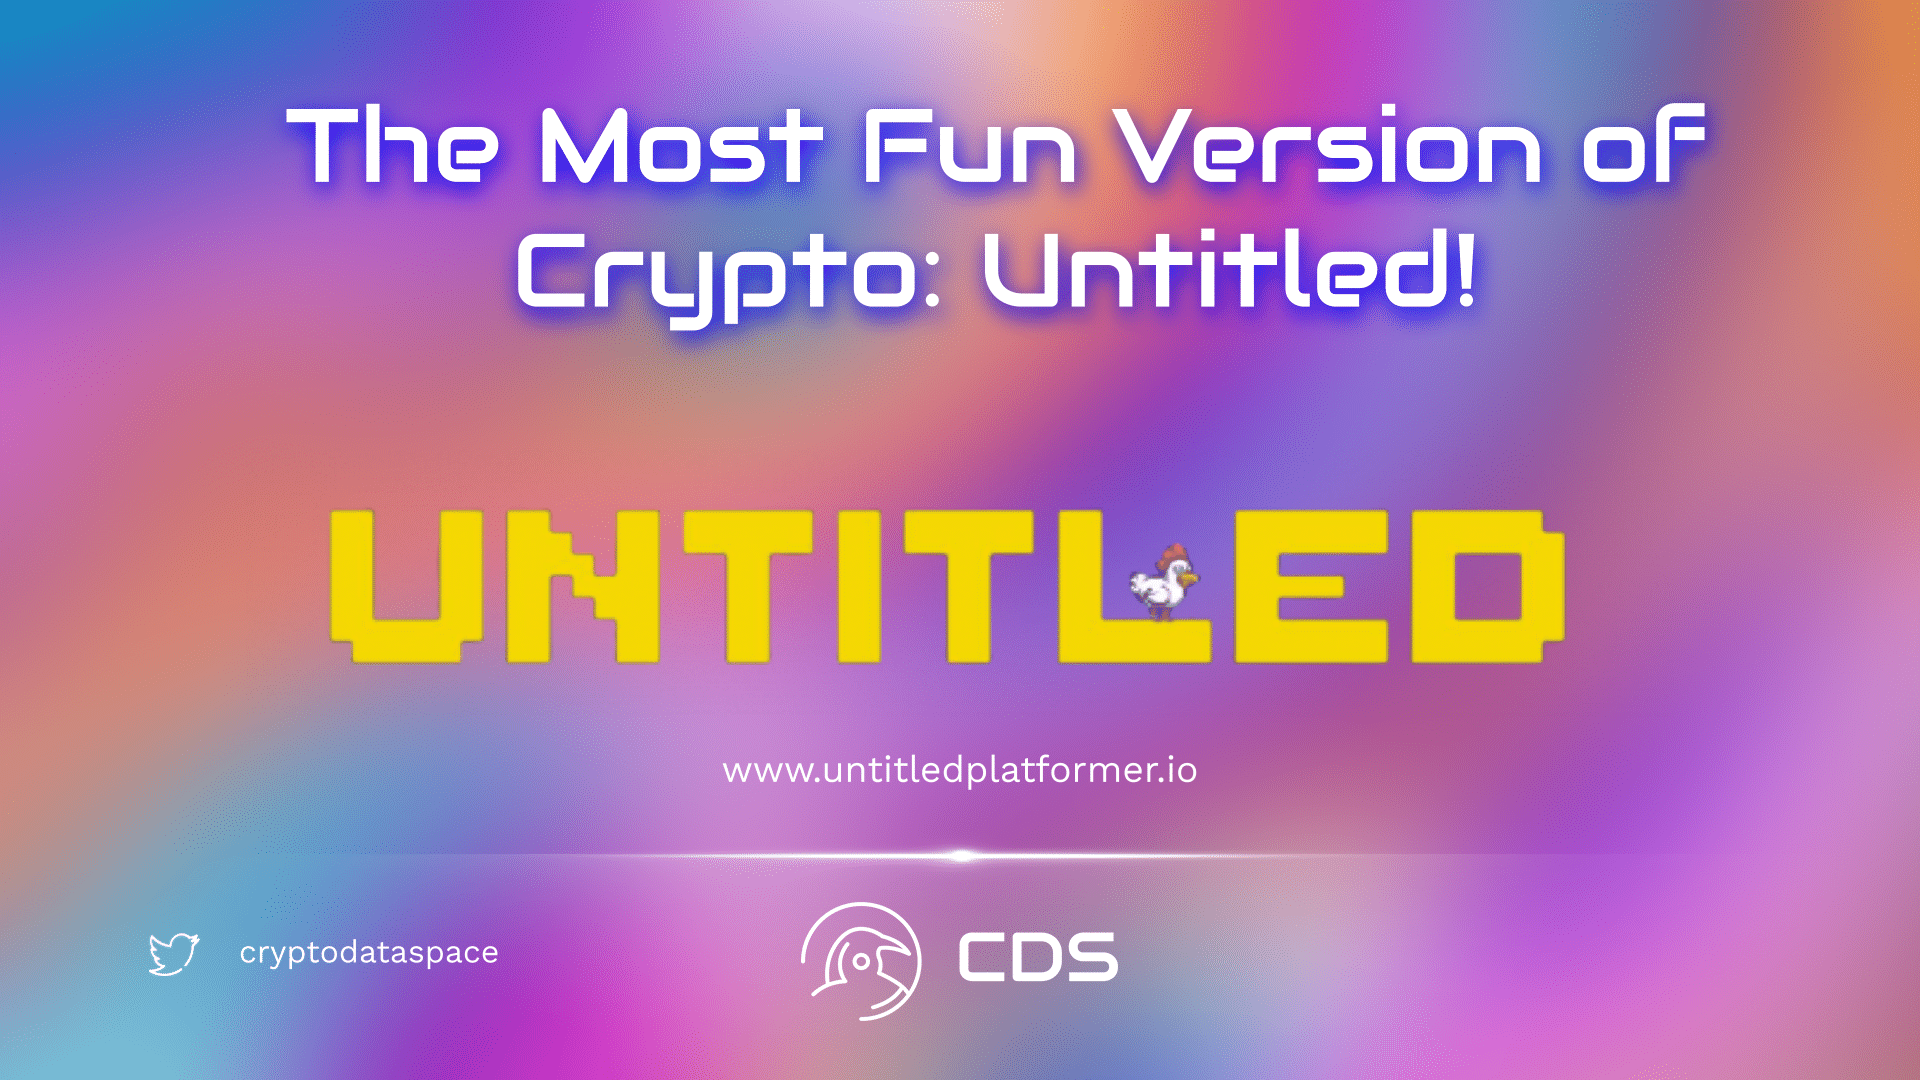 The Most Fun Version of Crypto: Untitled!